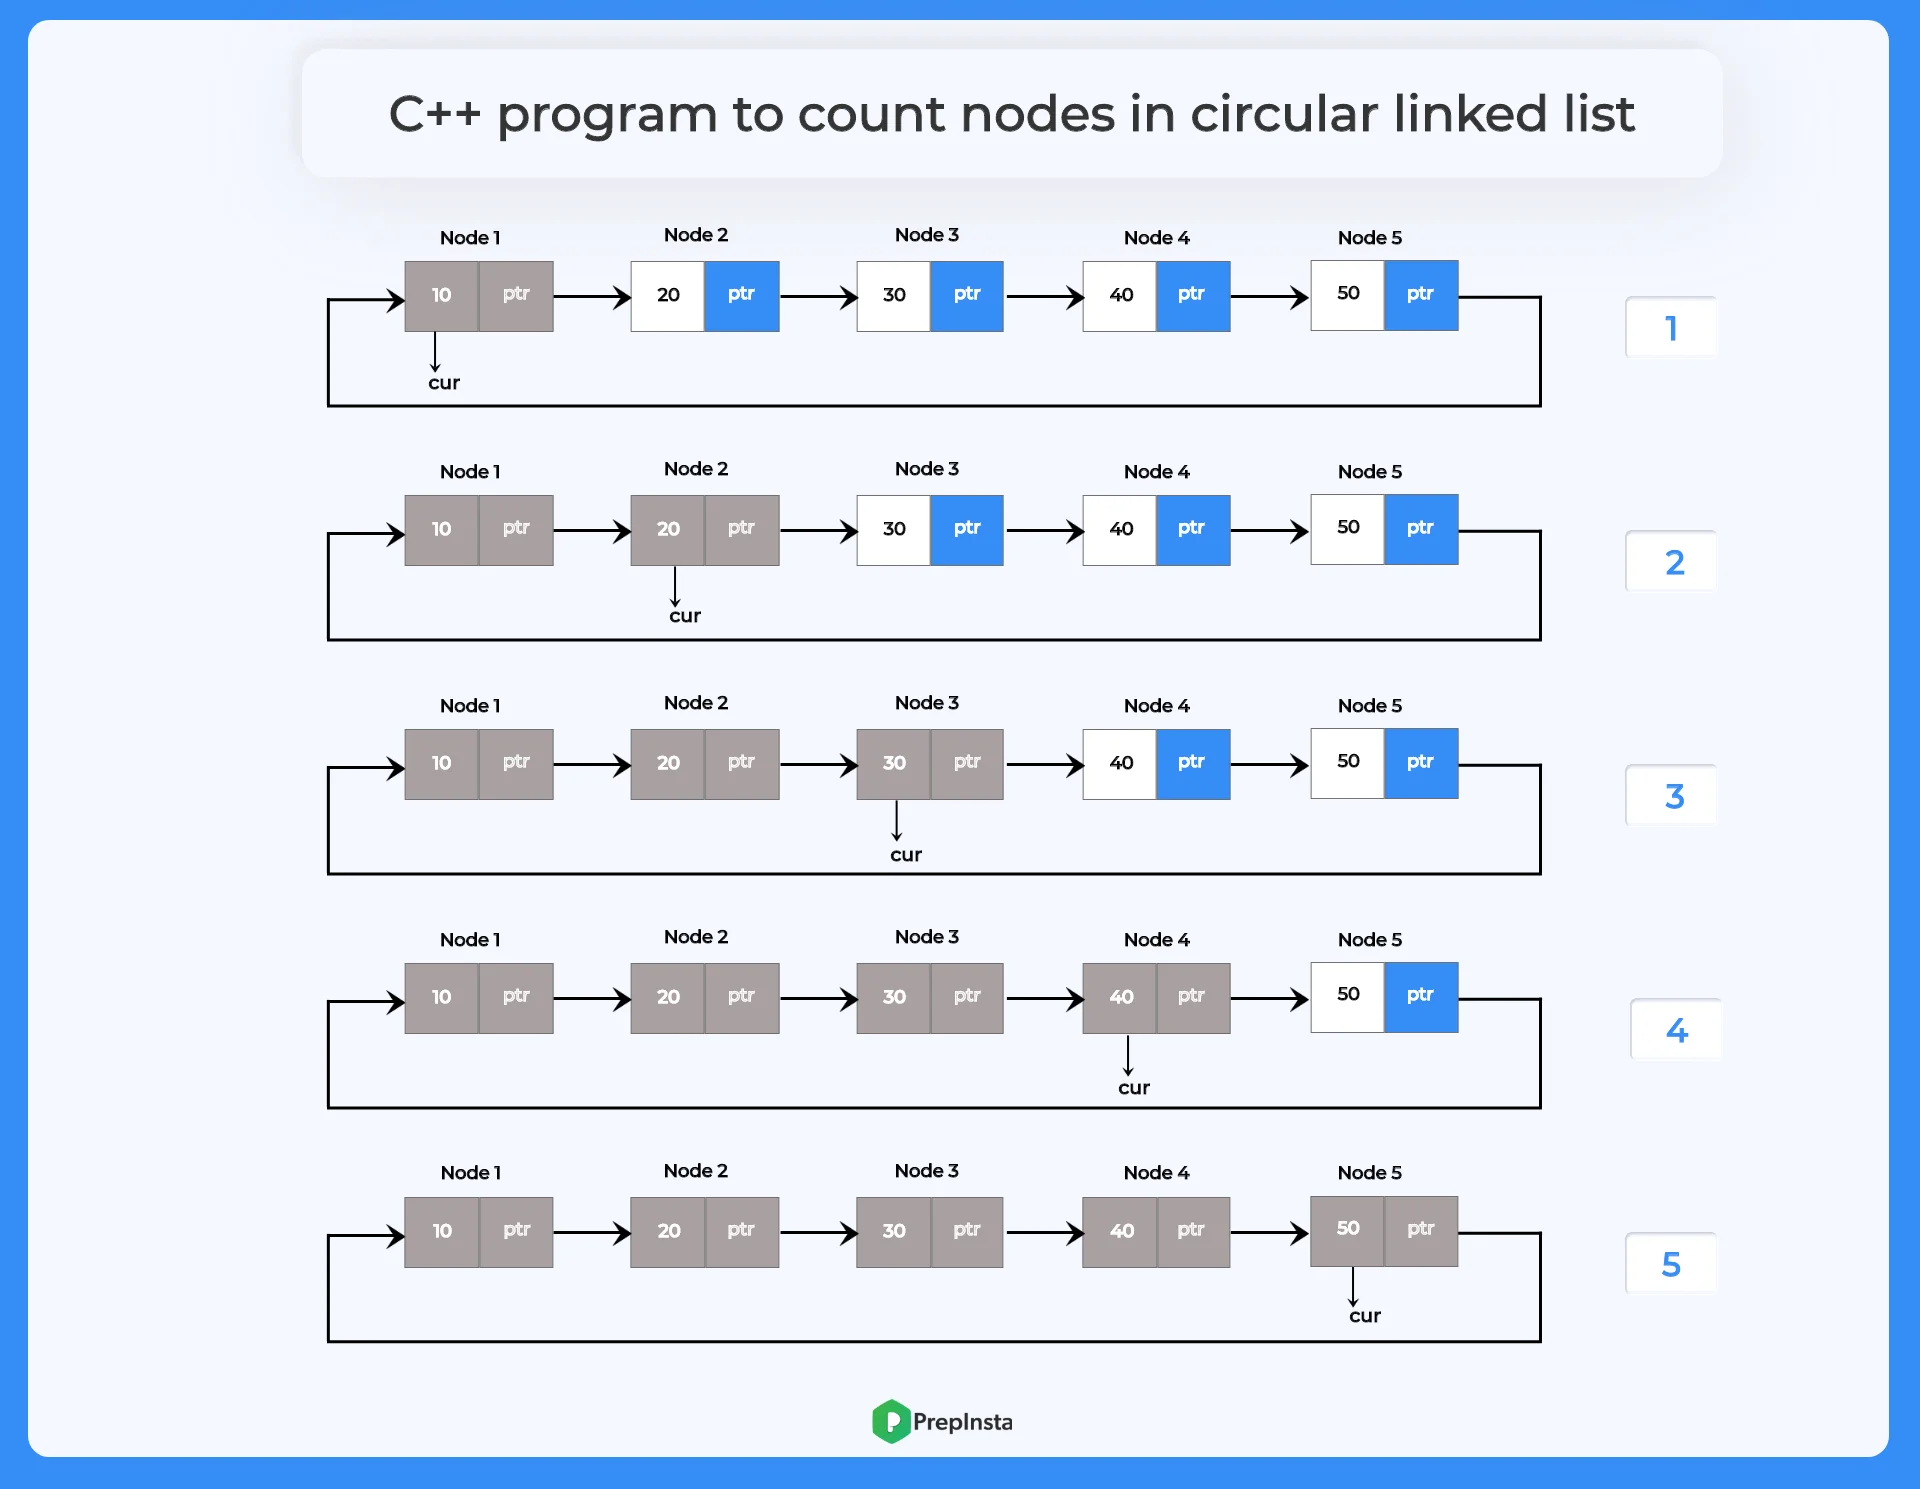 C++ program to count nodes in circular linked list